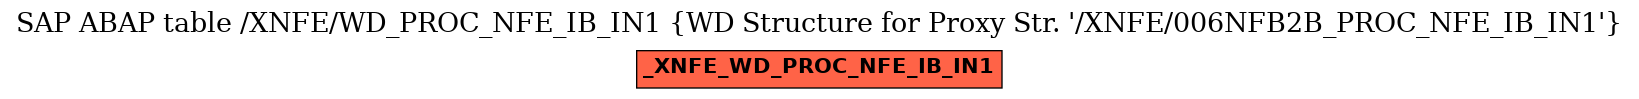 E-R Diagram for table /XNFE/WD_PROC_NFE_IB_IN1 (WD Structure for Proxy Str. 